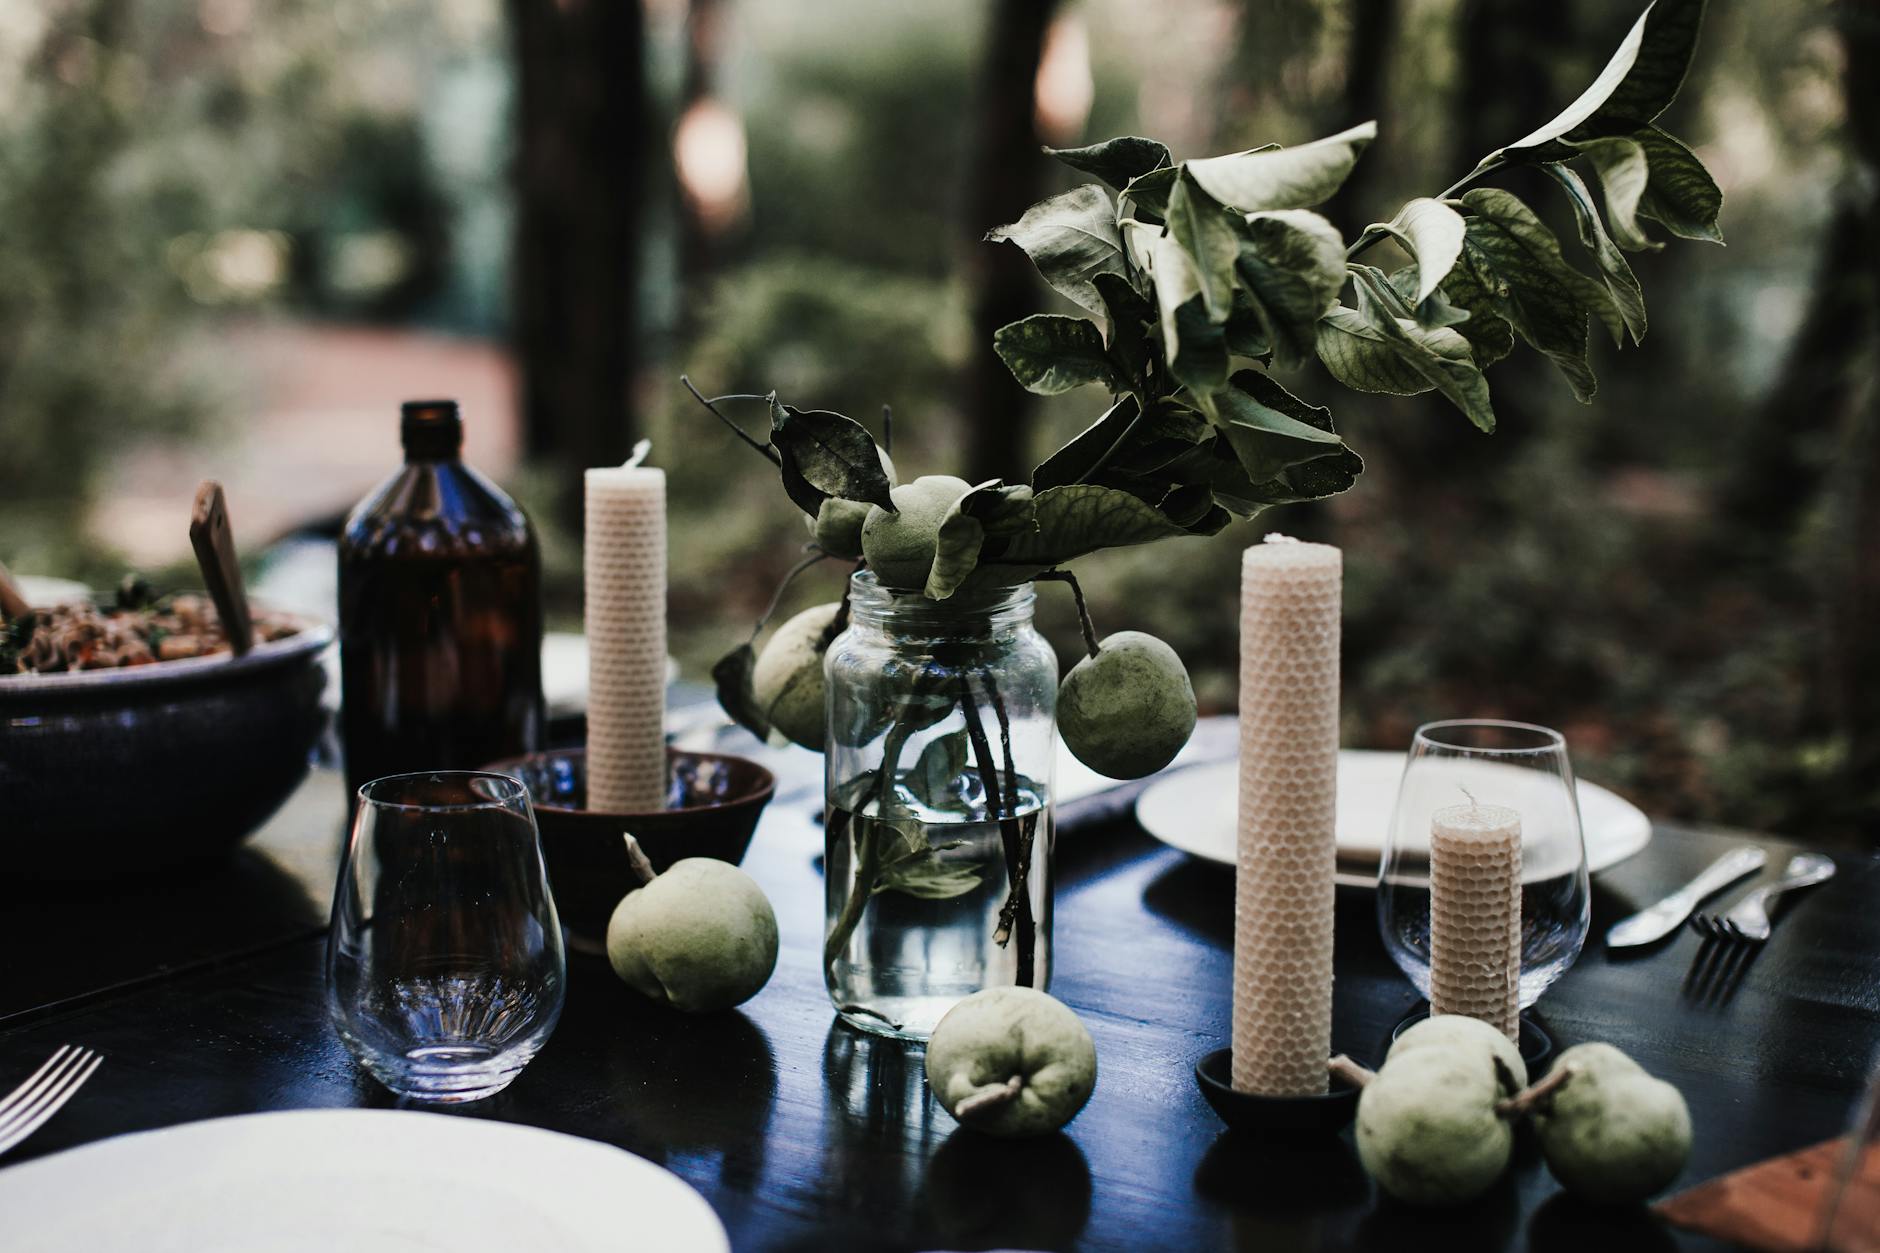 Candles with fresh apples placed on table